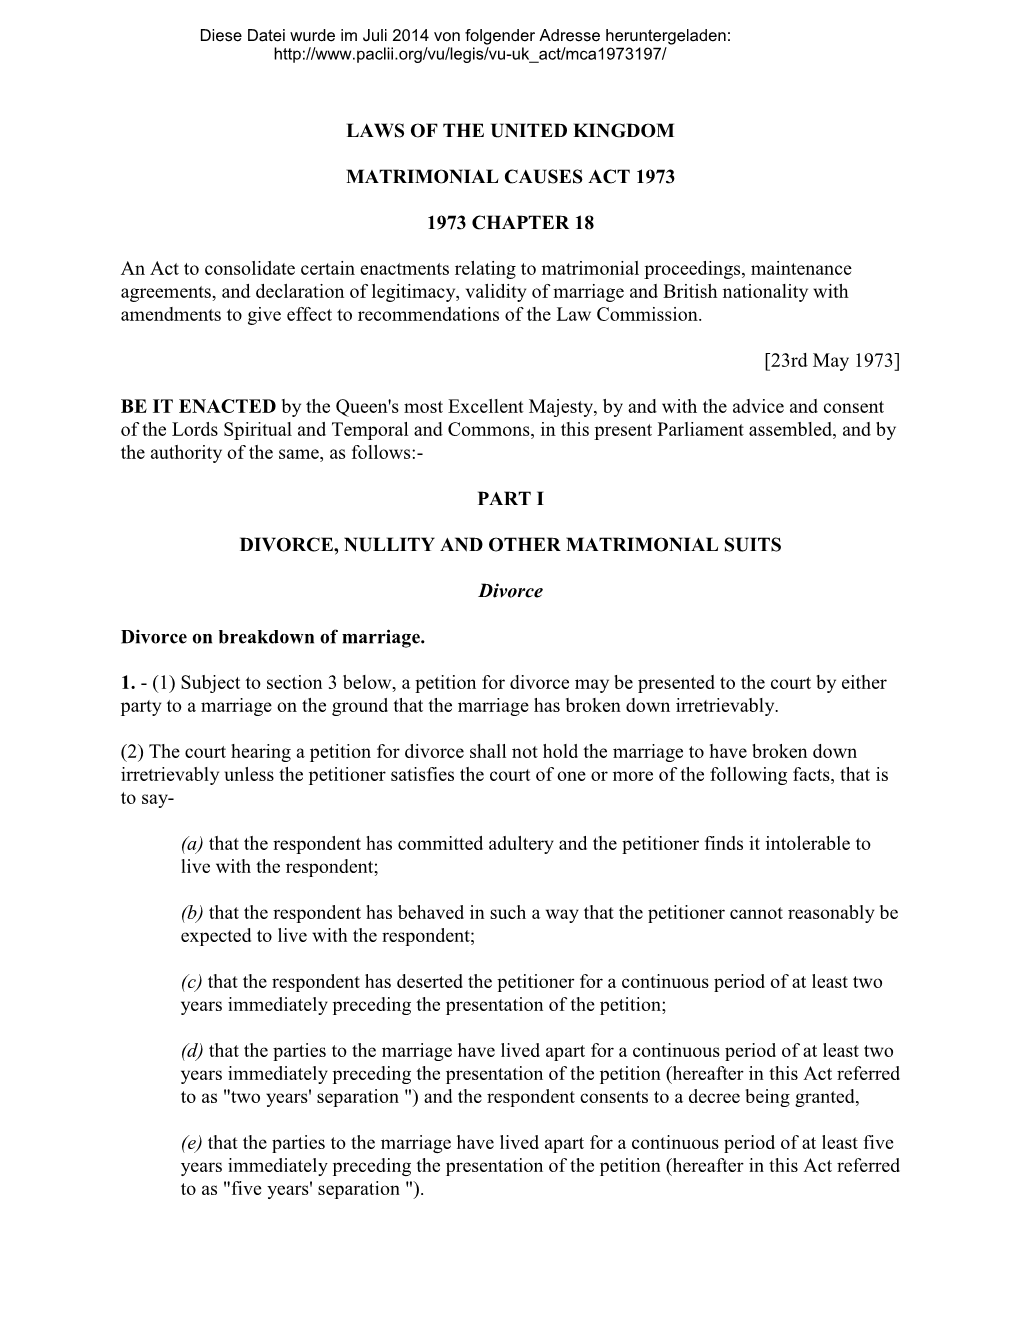 Laws of the United Kingdom Matrimonial Causes Act 1973